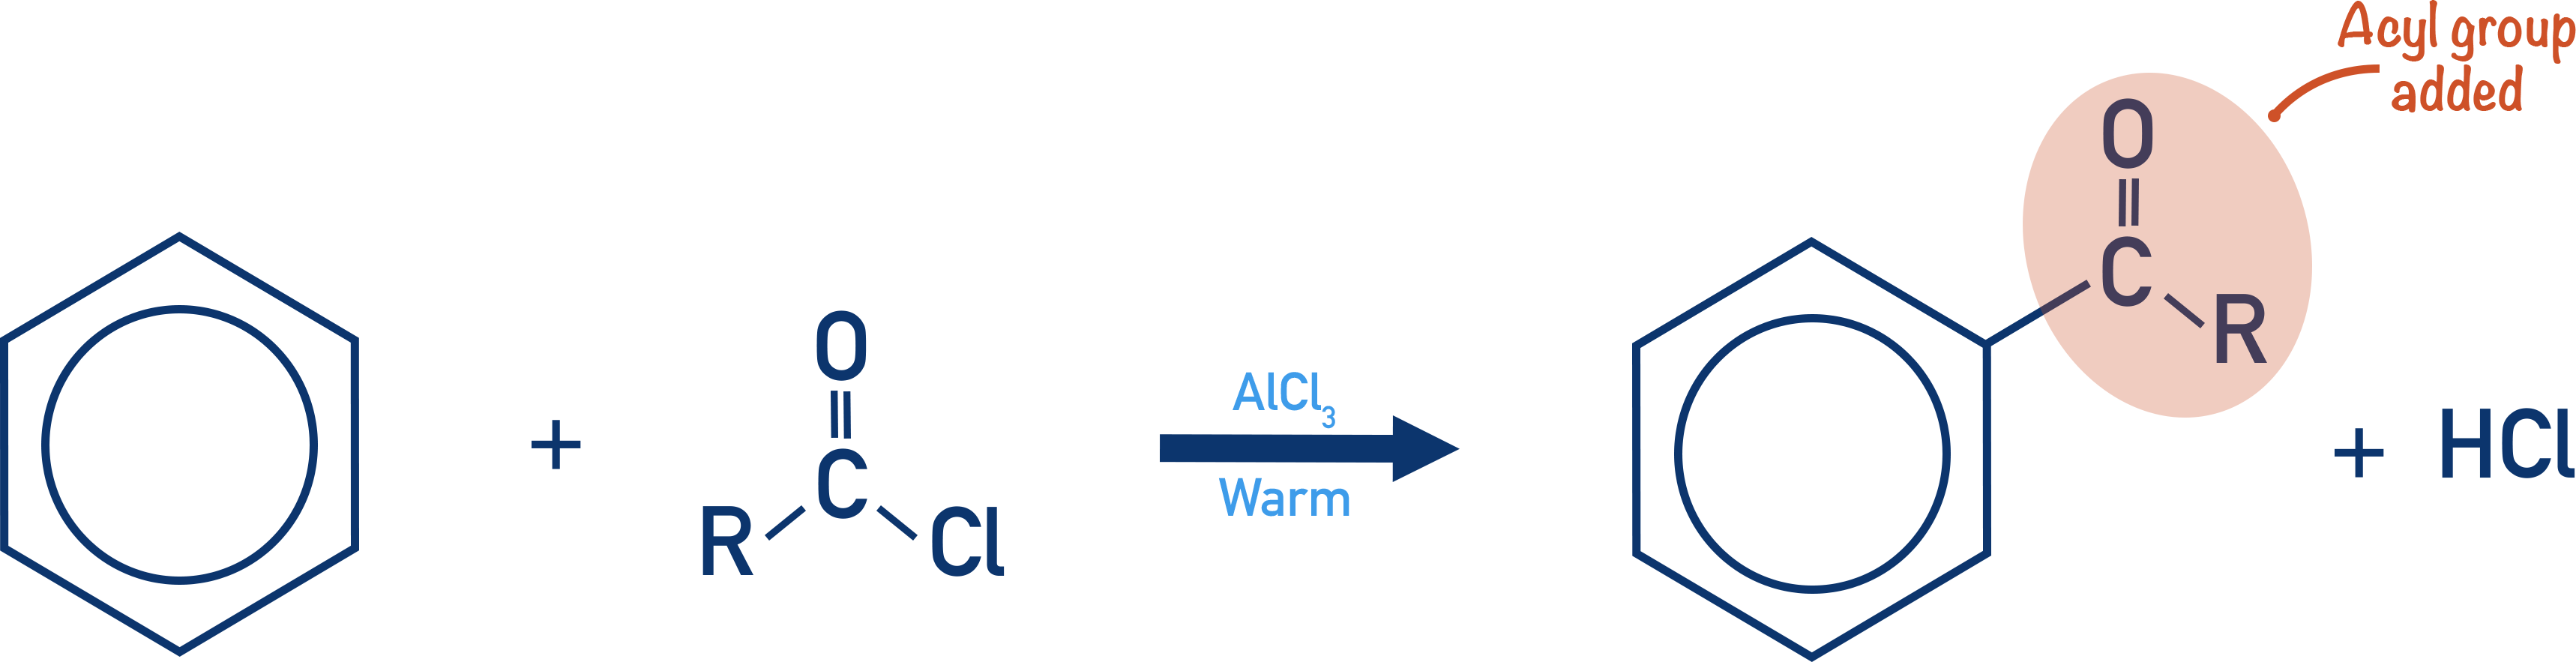 acylation of benzene reaction with acyl chloride halide carrier a-level chemistry